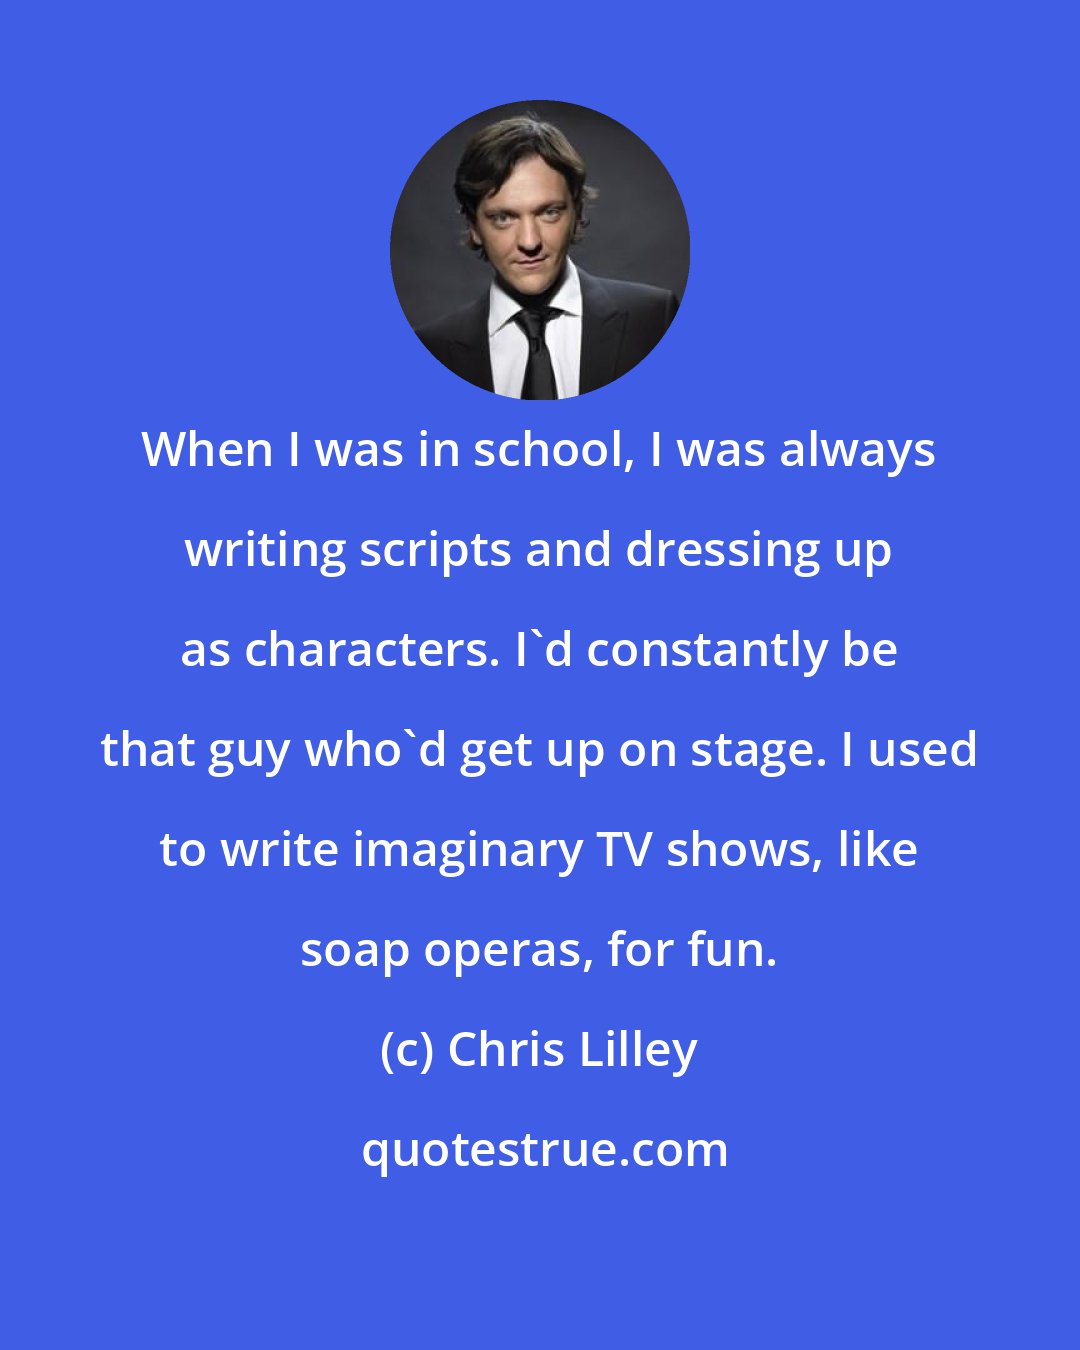 Chris Lilley: When I was in school, I was always writing scripts and dressing up as characters. I'd constantly be that guy who'd get up on stage. I used to write imaginary TV shows, like soap operas, for fun.